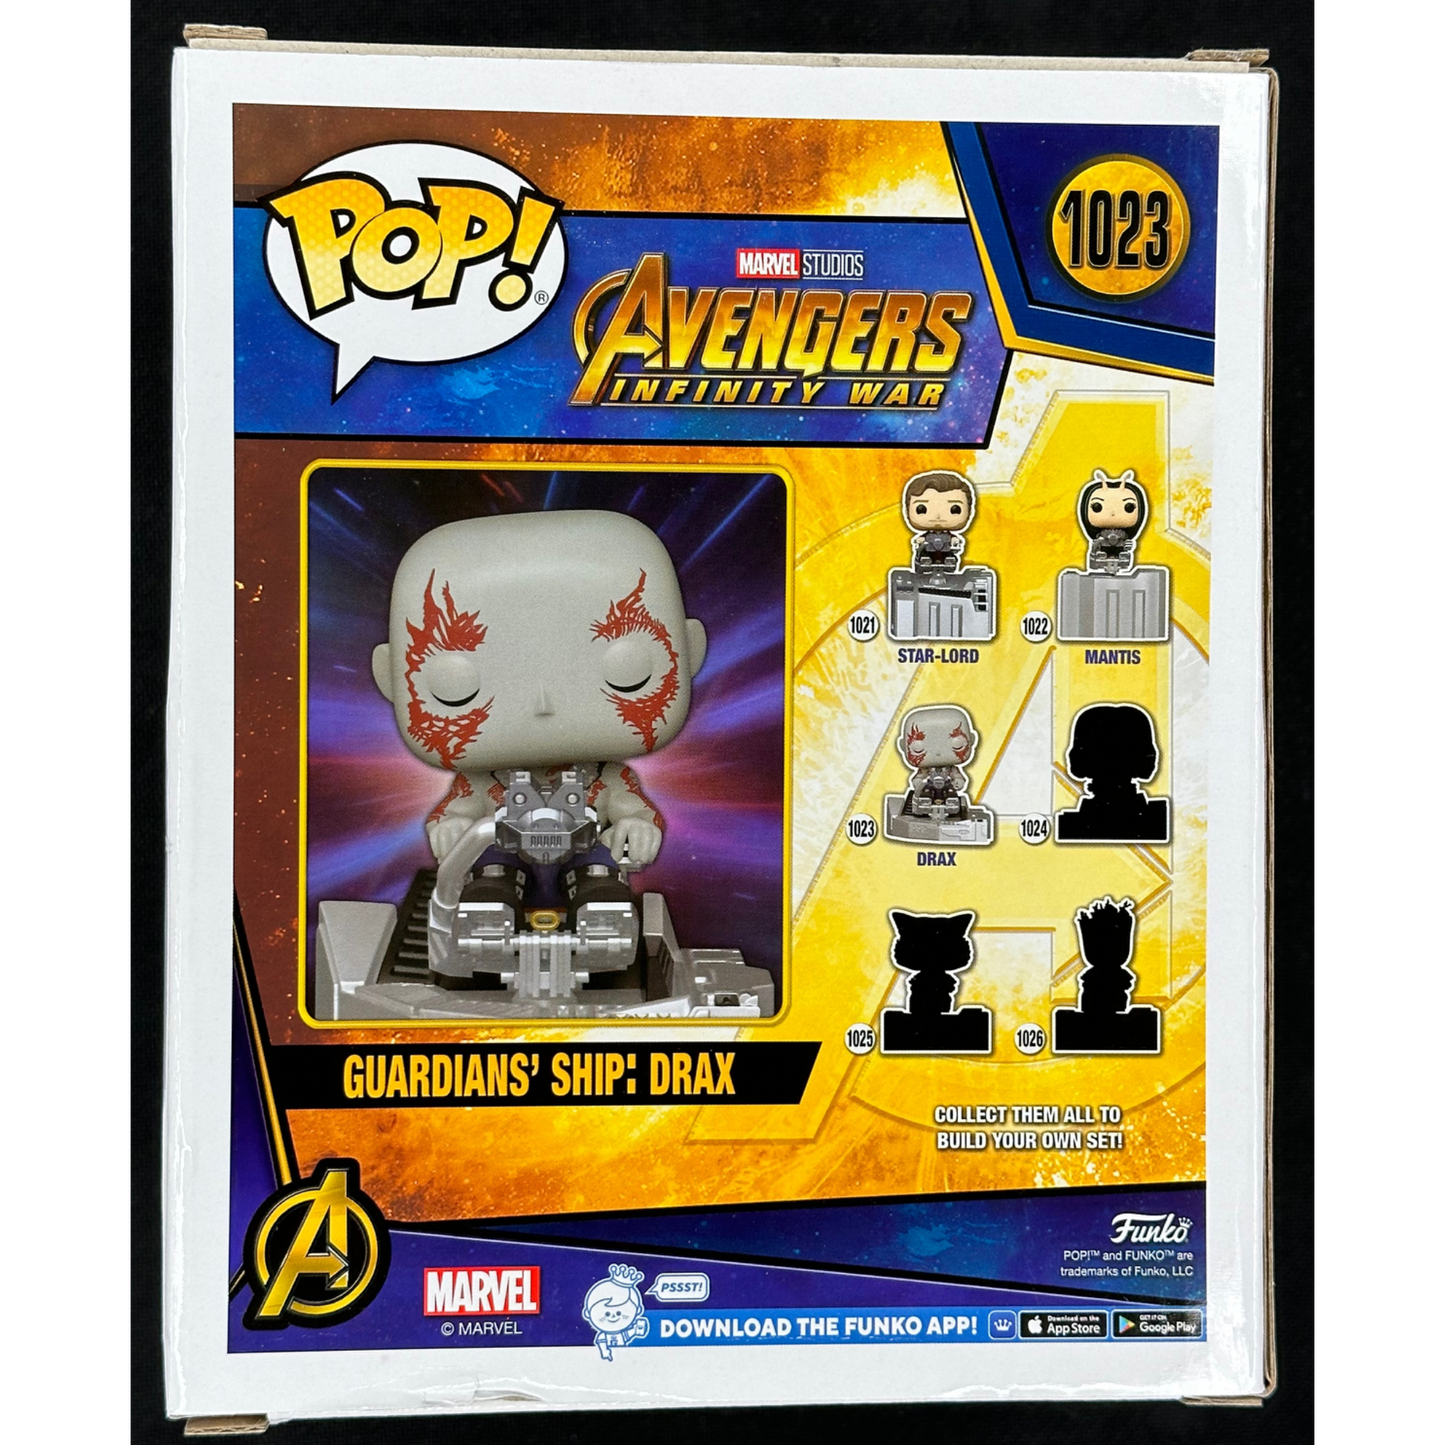 Guardians' Ship: Drax Funko Pop! Avengers Infinity was Special Edition #1023